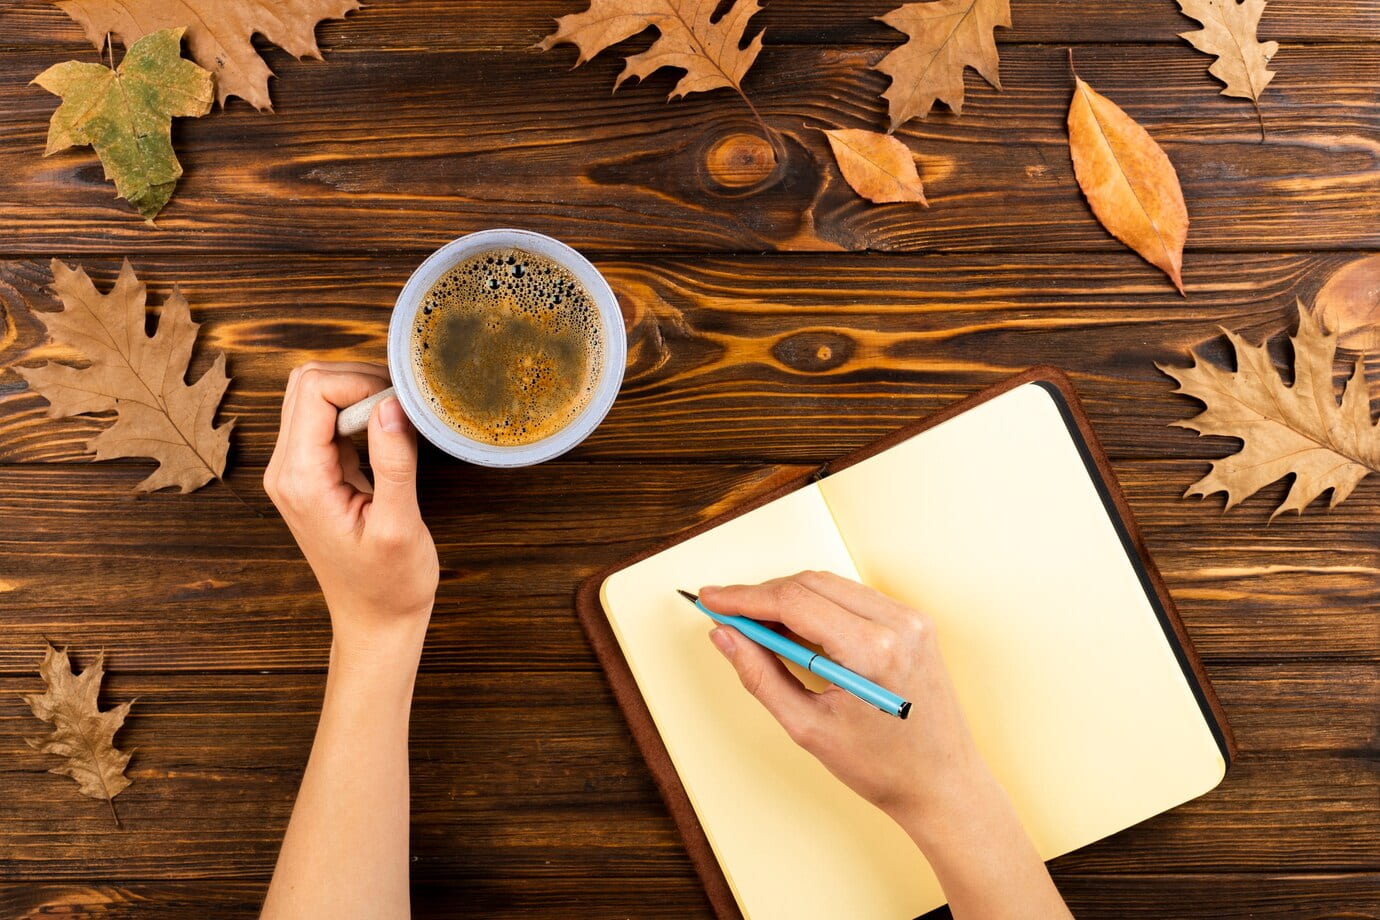 A wooden surface where someone's hands are visible. Left hand is holding a cup of coffee resting on the surface and the right hand is holding a pencil and writing in a blank notebook.</body></html>